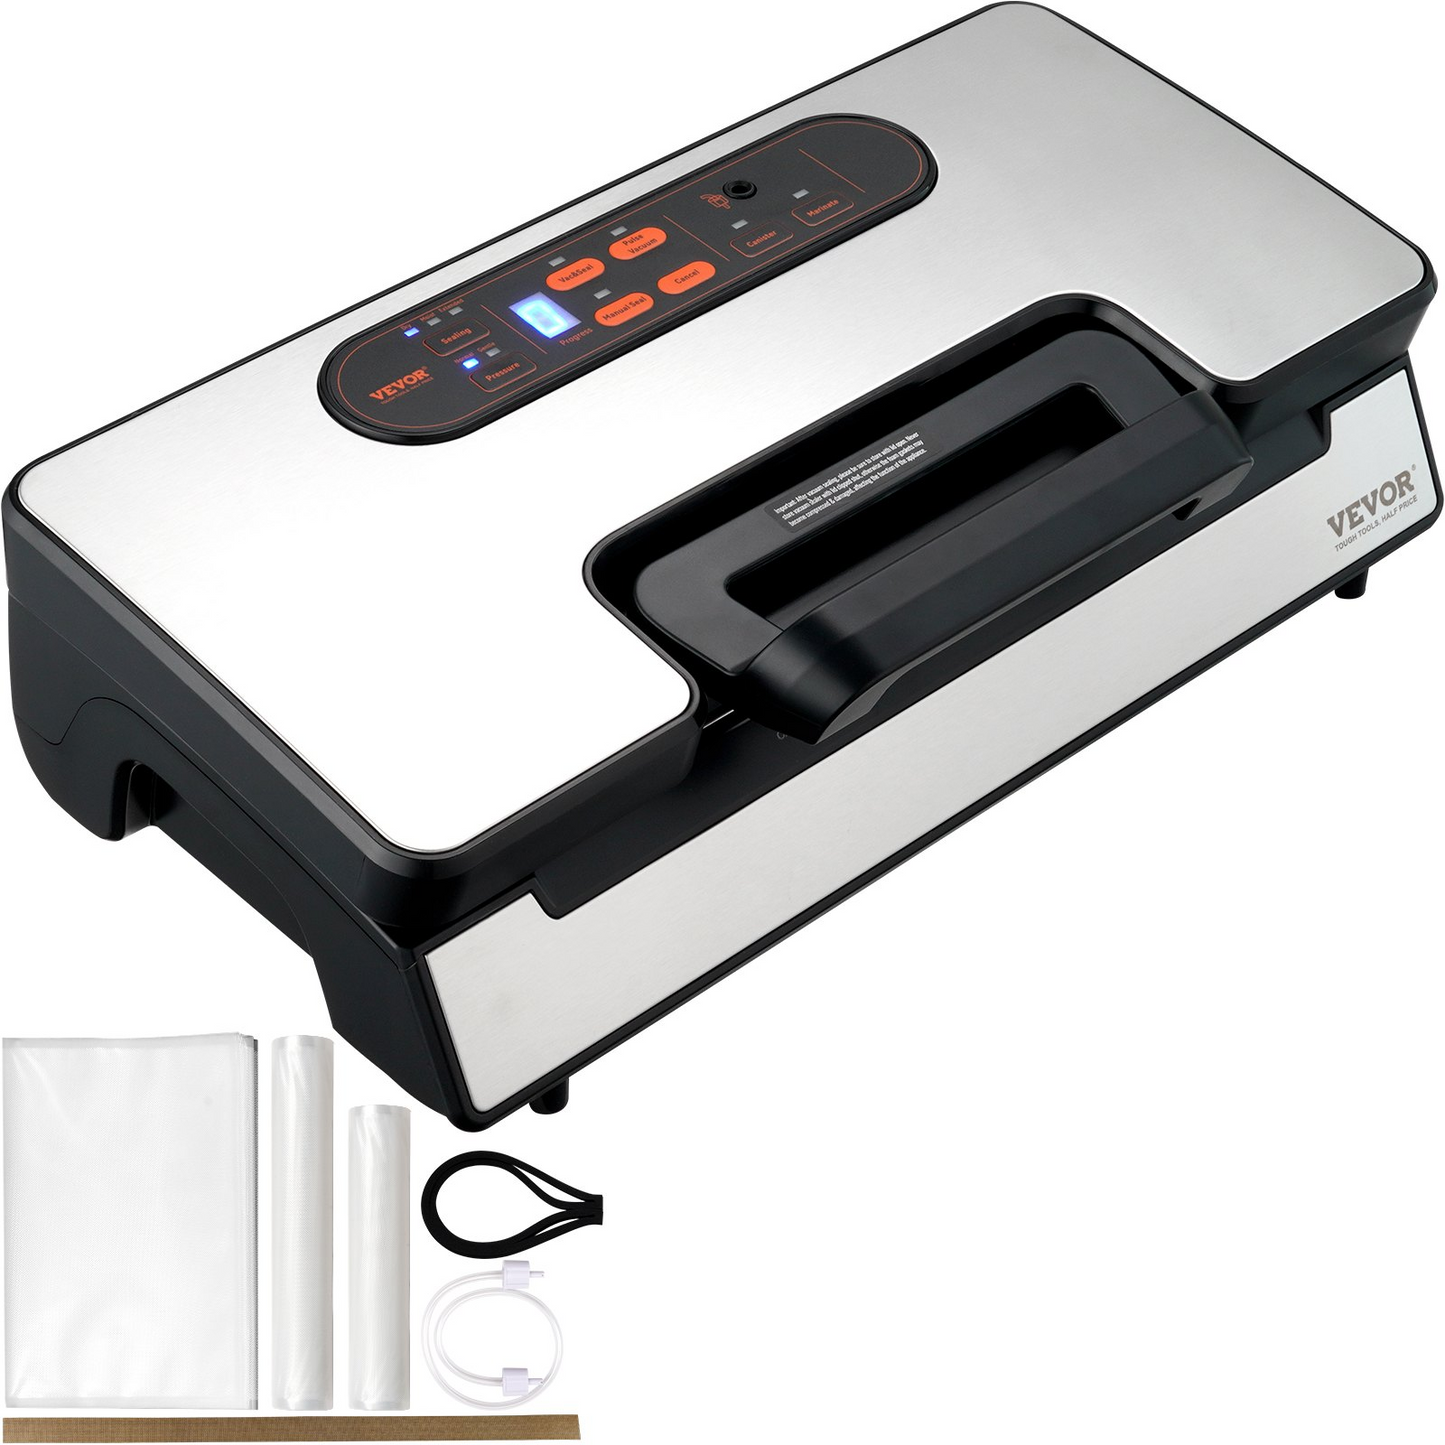 VEVOR Vacuum Sealer Machine, 90Kpa 130W Powerful Dual Pump and Dual Sealing, Dry and Moist Food Storage, Automatic and Manual Air Sealing System with Built-in Cutter, with Seal Bag and External Hose, Goodies N Stuff